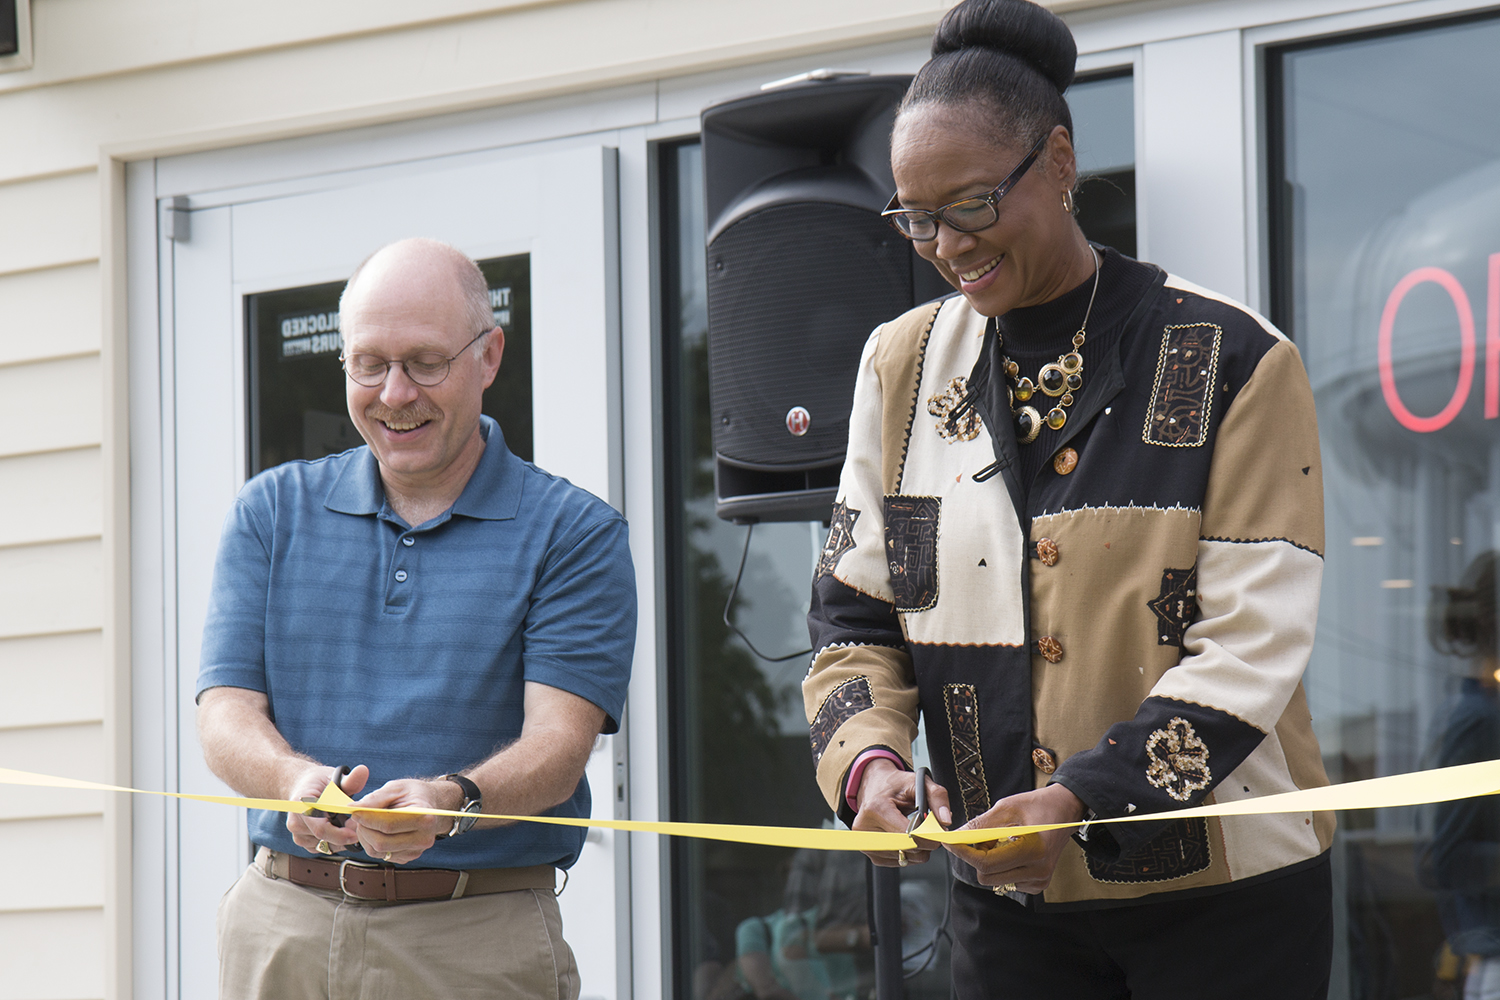 Toby Ortstaft, Board President of the Lutheran Student Center, left, and Lavonta Williams, a member of the City Council for District One, right, prepare to cut the ceremonial ribbon for the grand opening of Fairmount Coffee Co. 